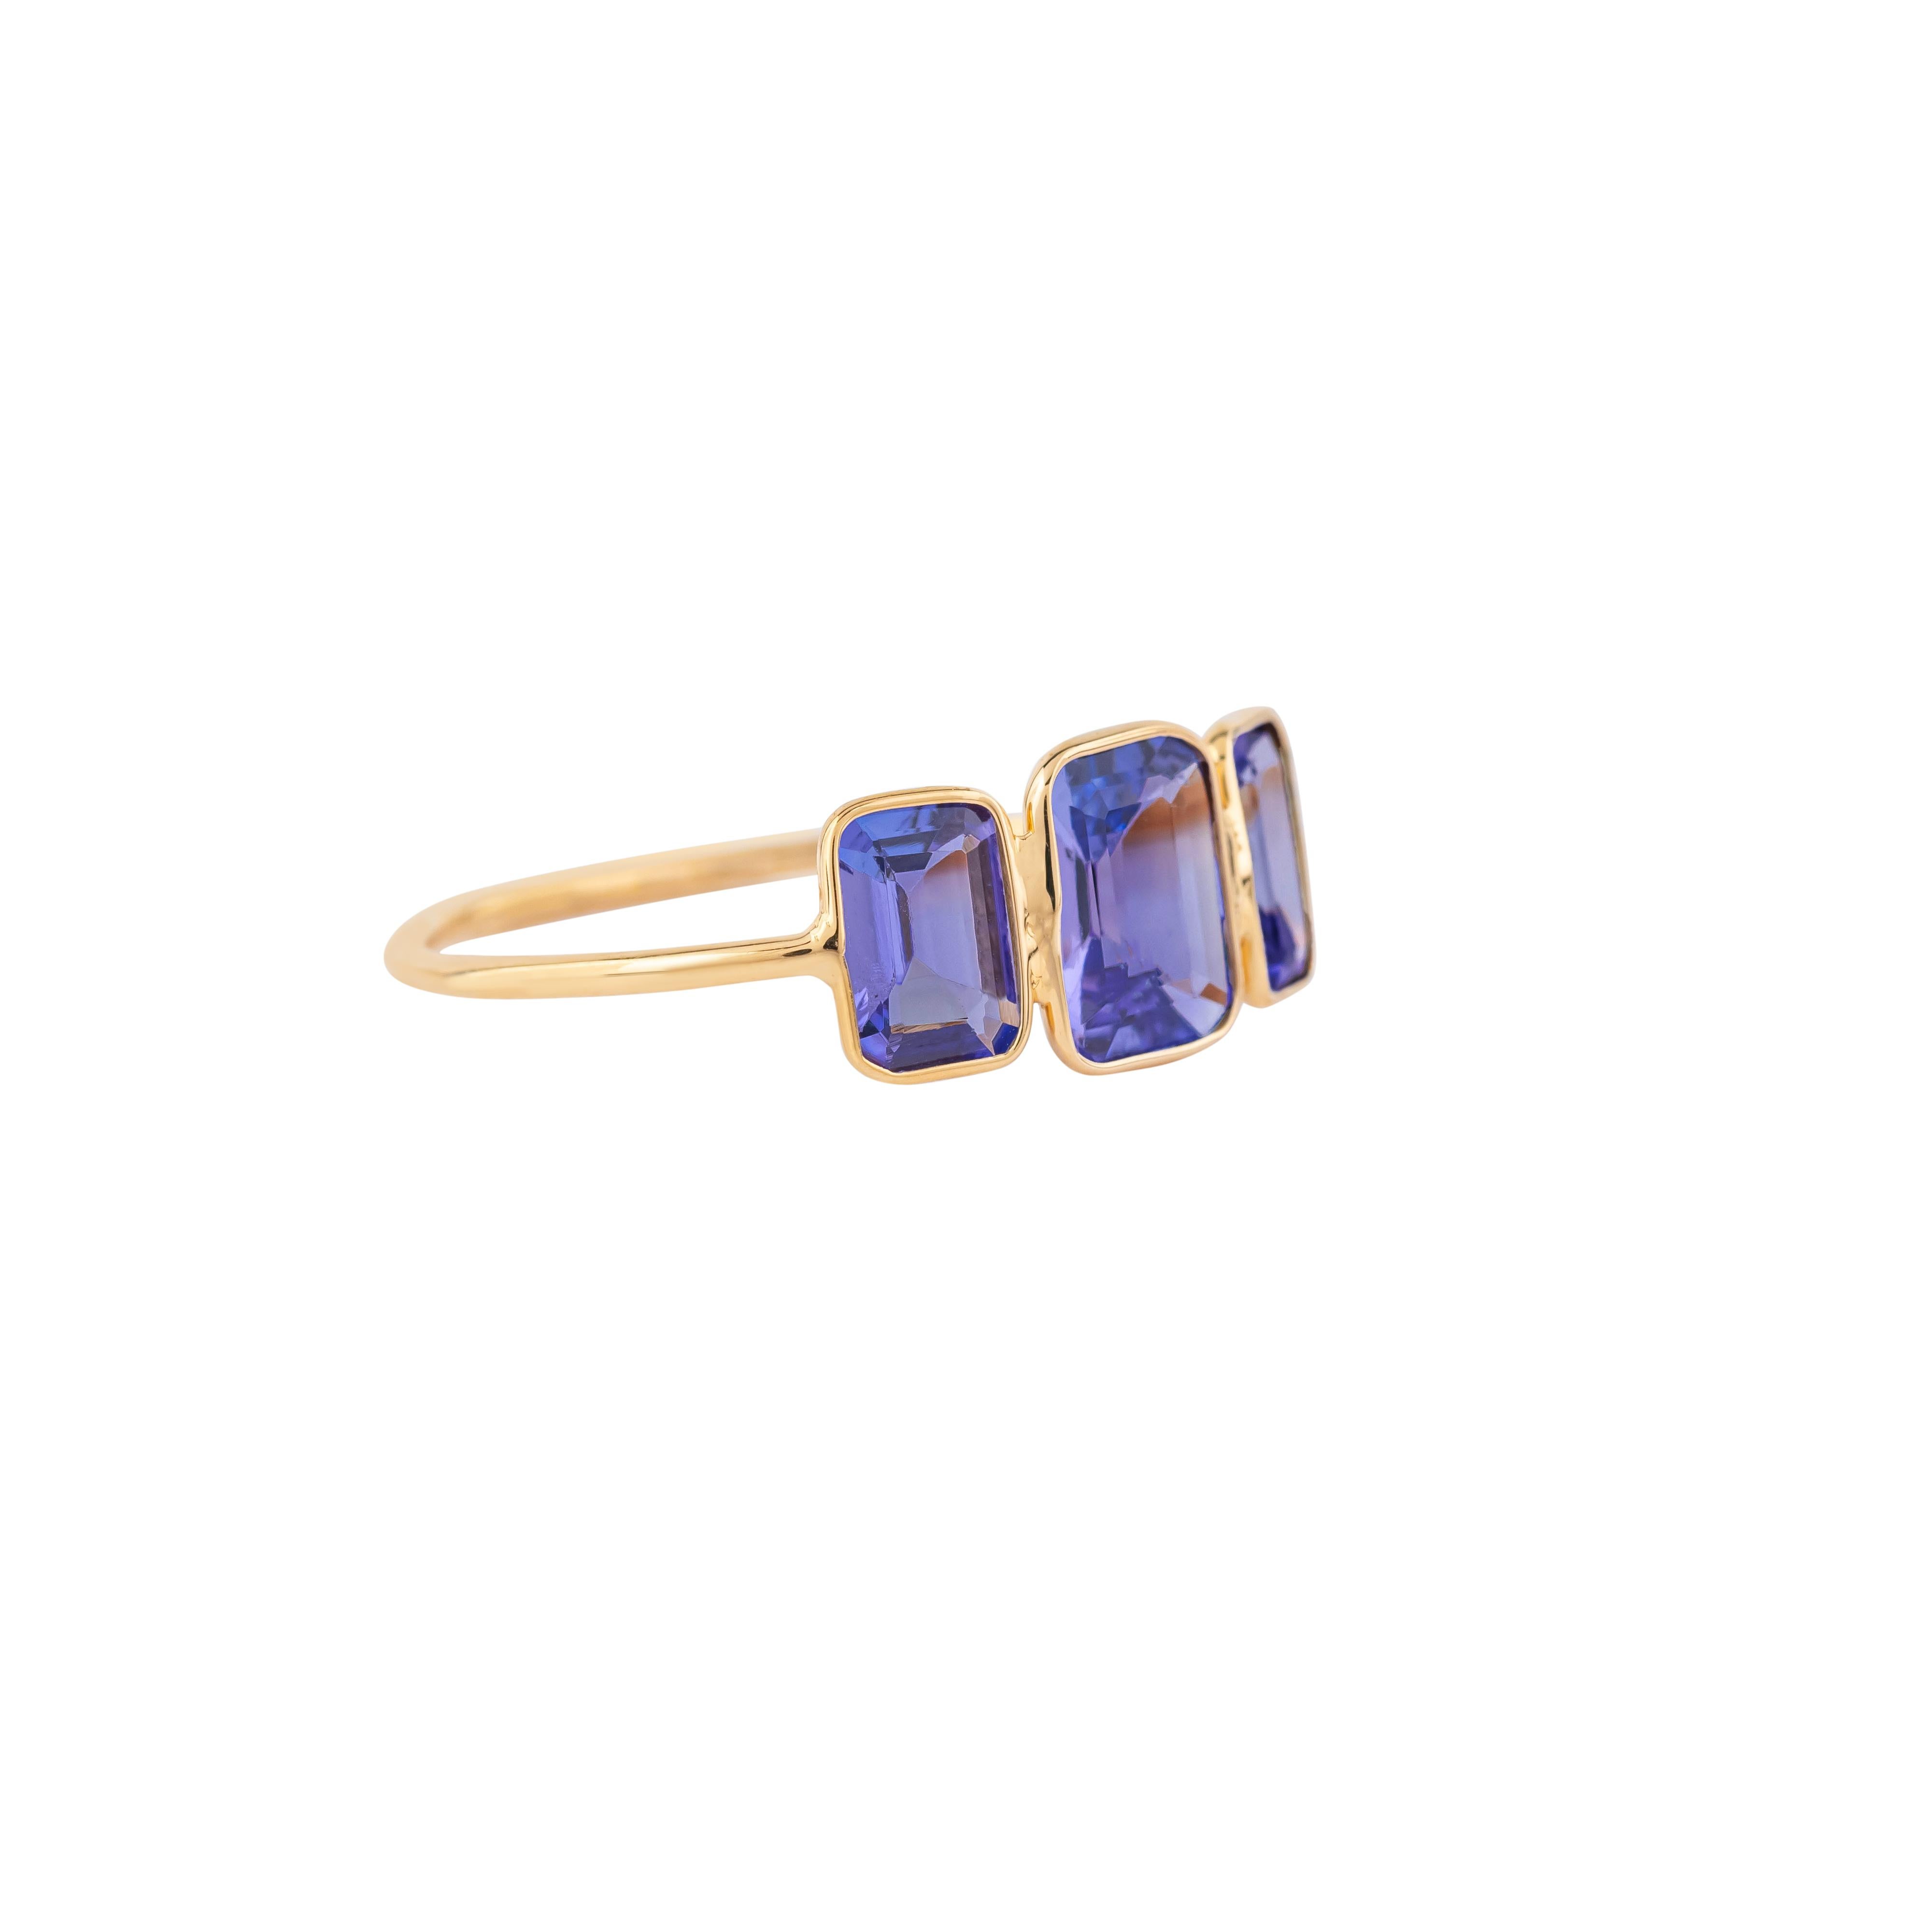 Step into the world of elegance with our 18 Karat Gold 1.7 Carat Tanzanite Three Stone Ring – a masterpiece crafted to captivate the senses and adorn your hand with sophistication. Each ring is meticulously crafted and curated, showcasing the